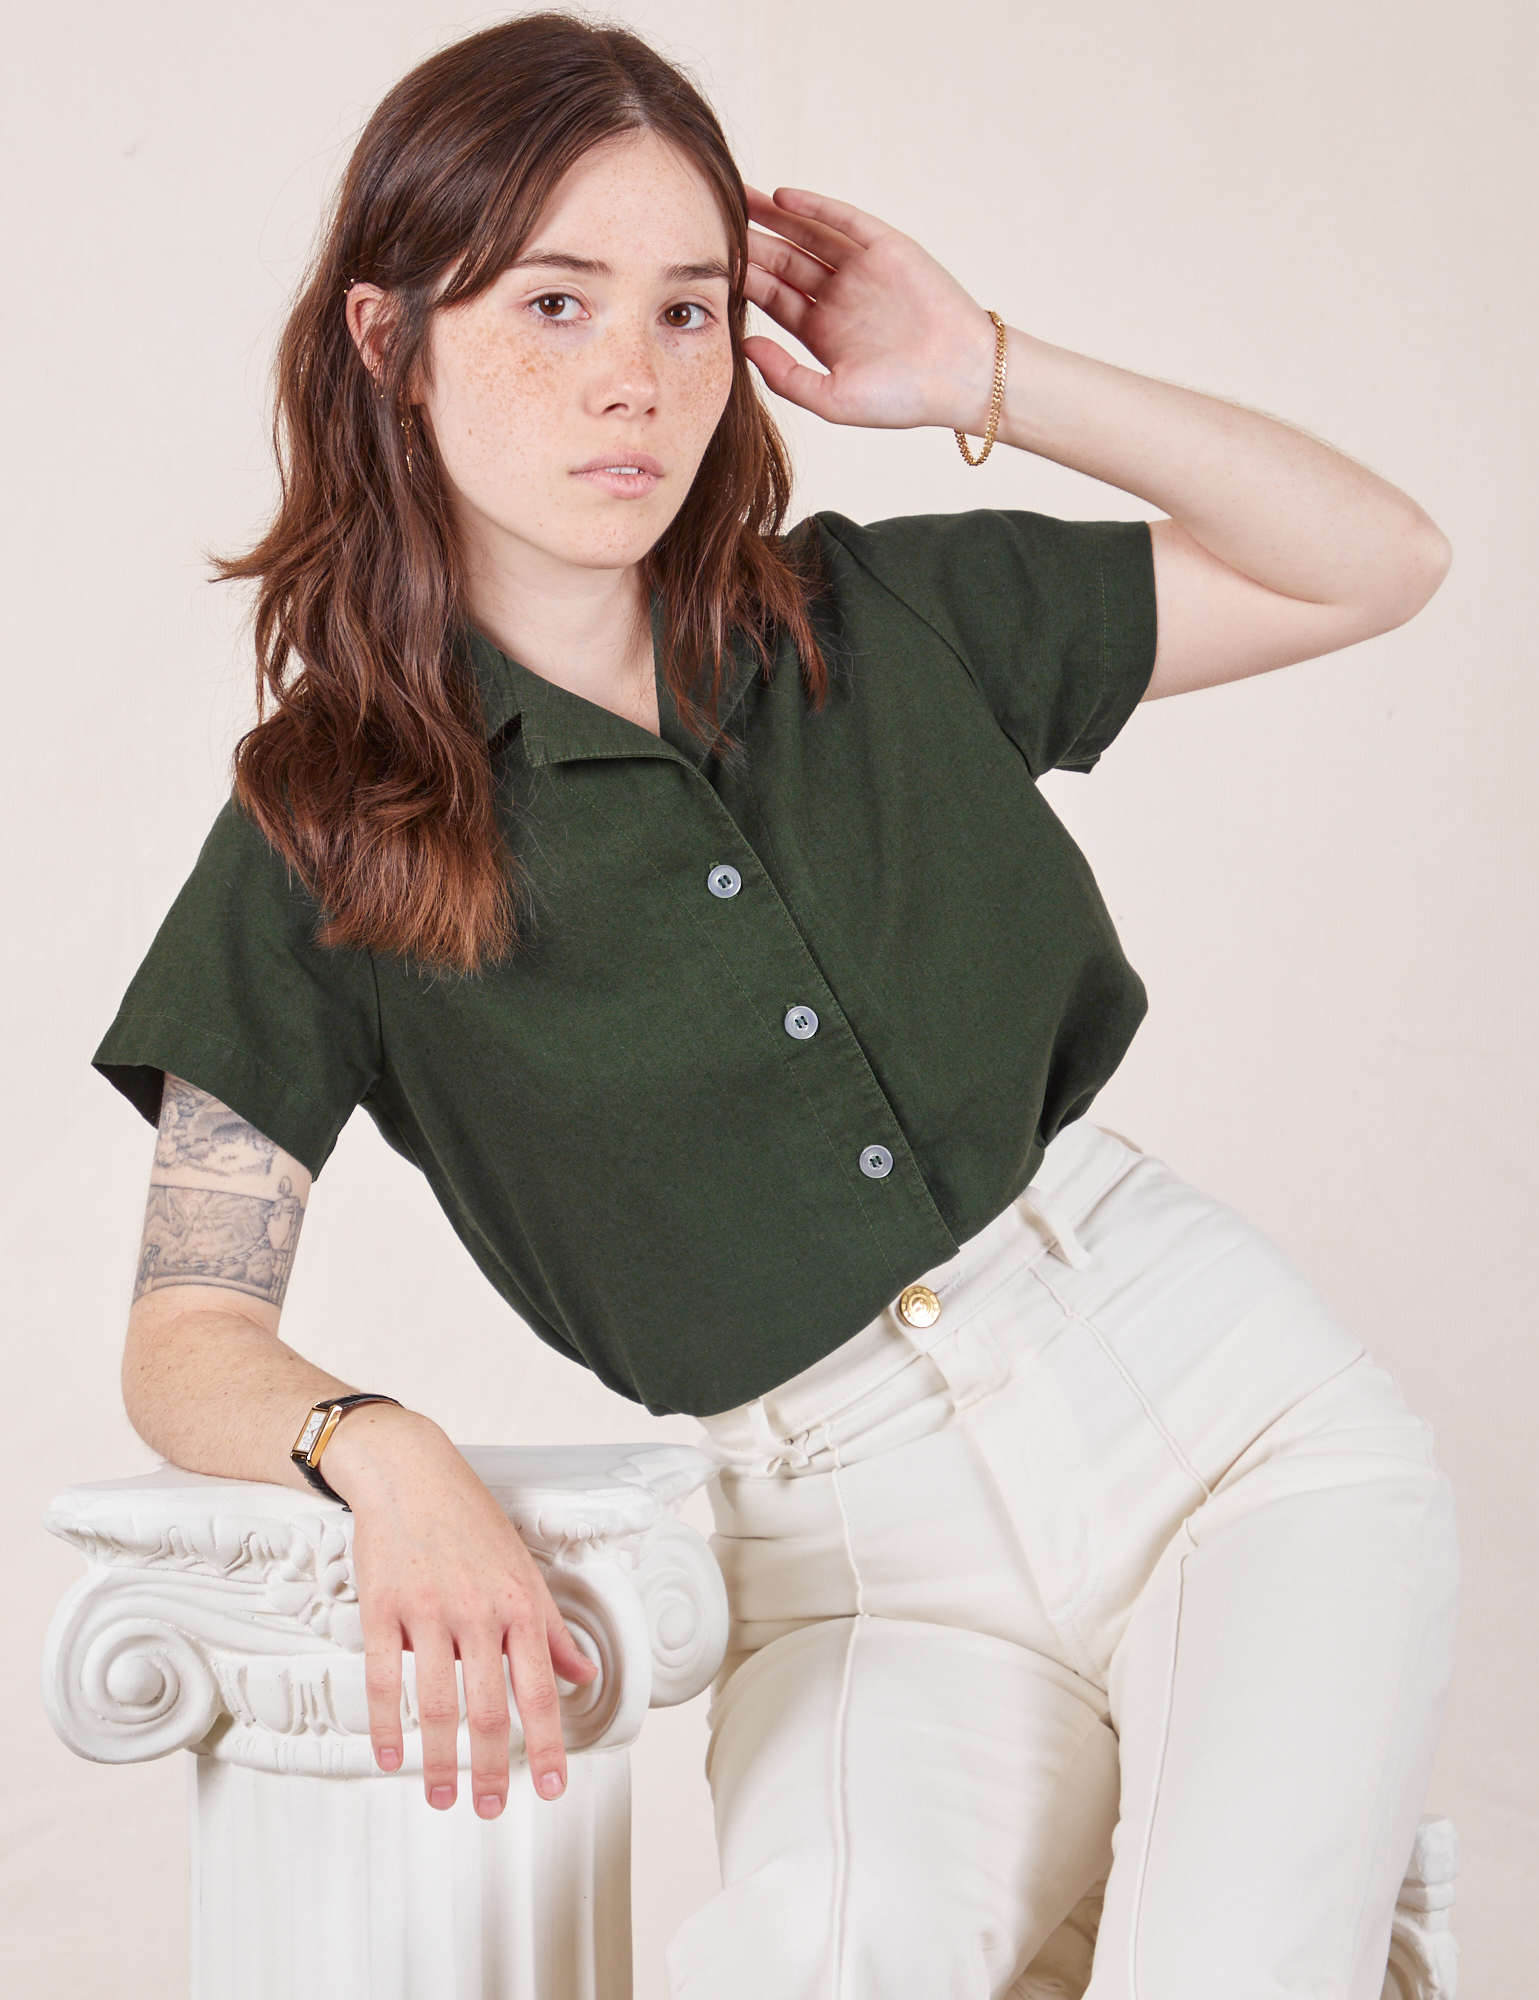 Hana is wearing Pantry Button-Up in Swamp Green and vintage tee off-white Western Pants